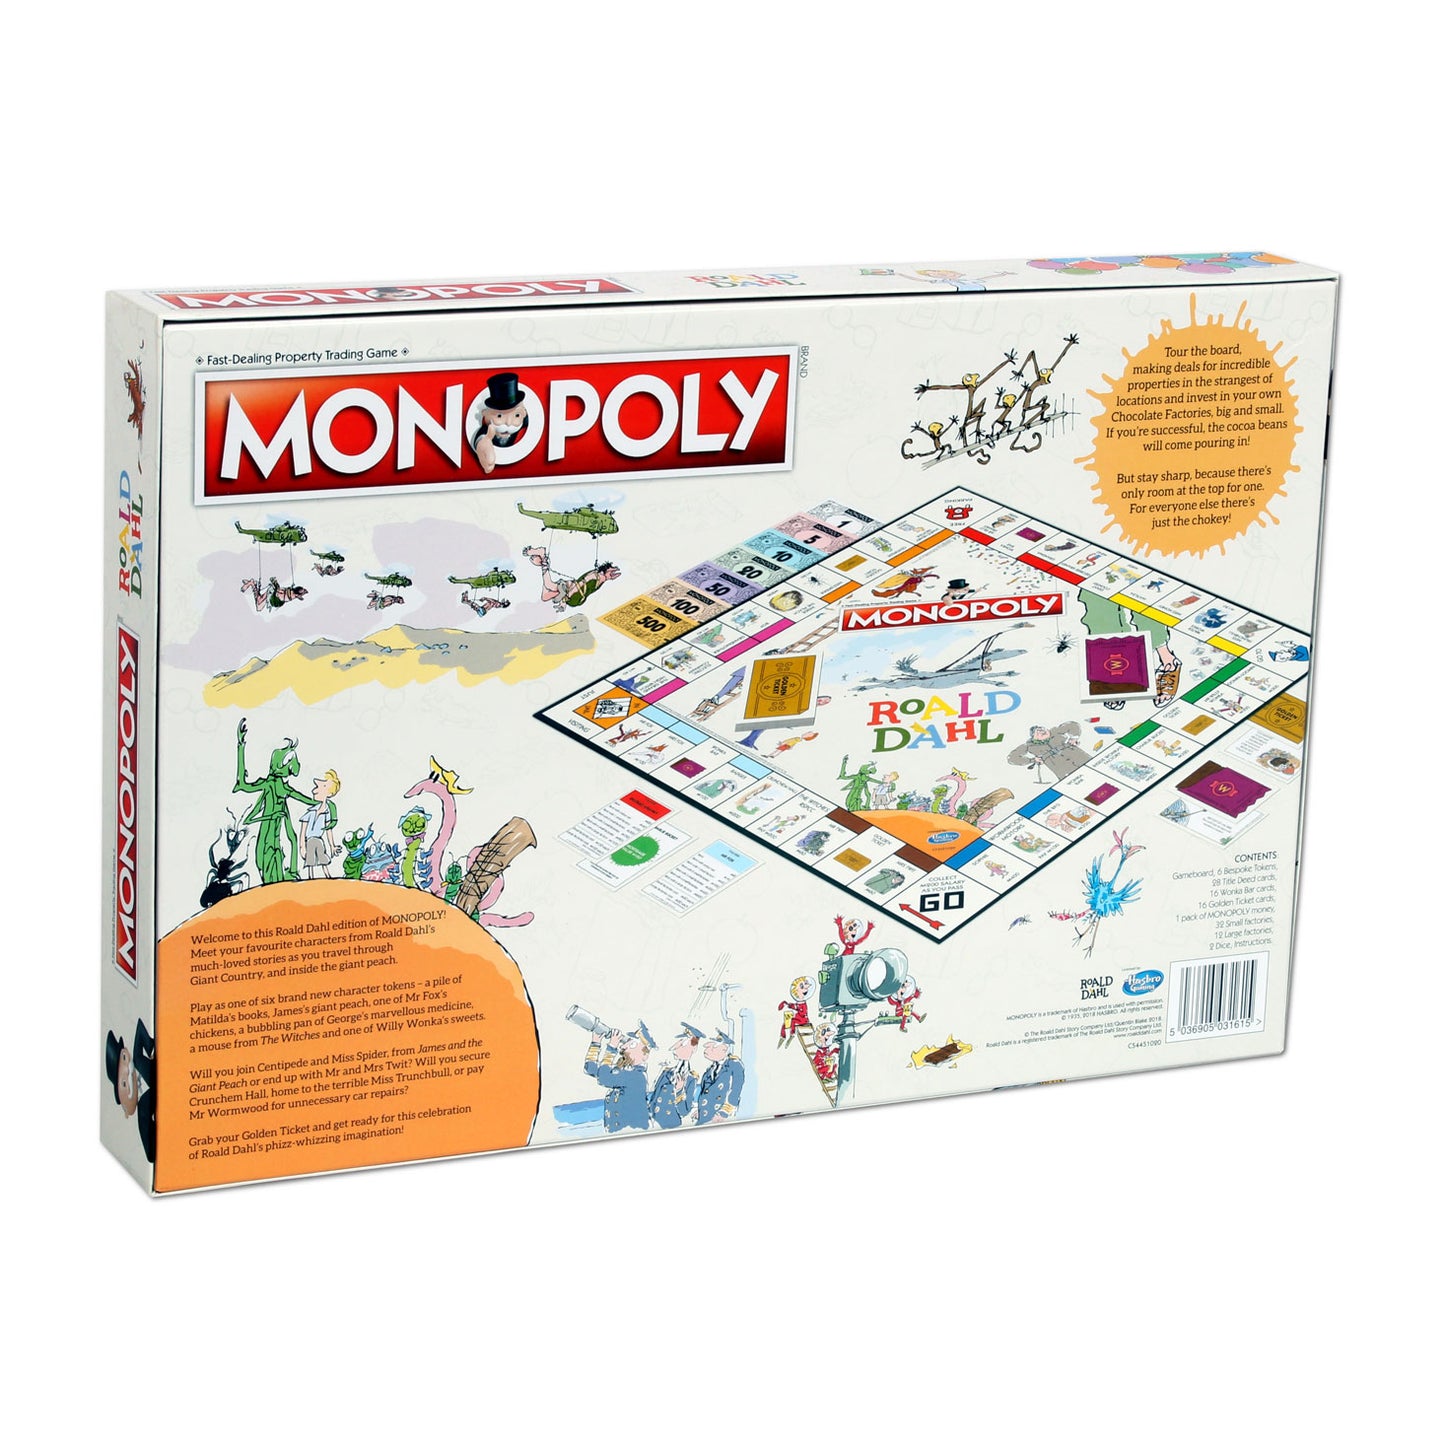 Monopoly board game based on characters by Roald Dahl and featuring Quentin Blake's illustrations- back of box